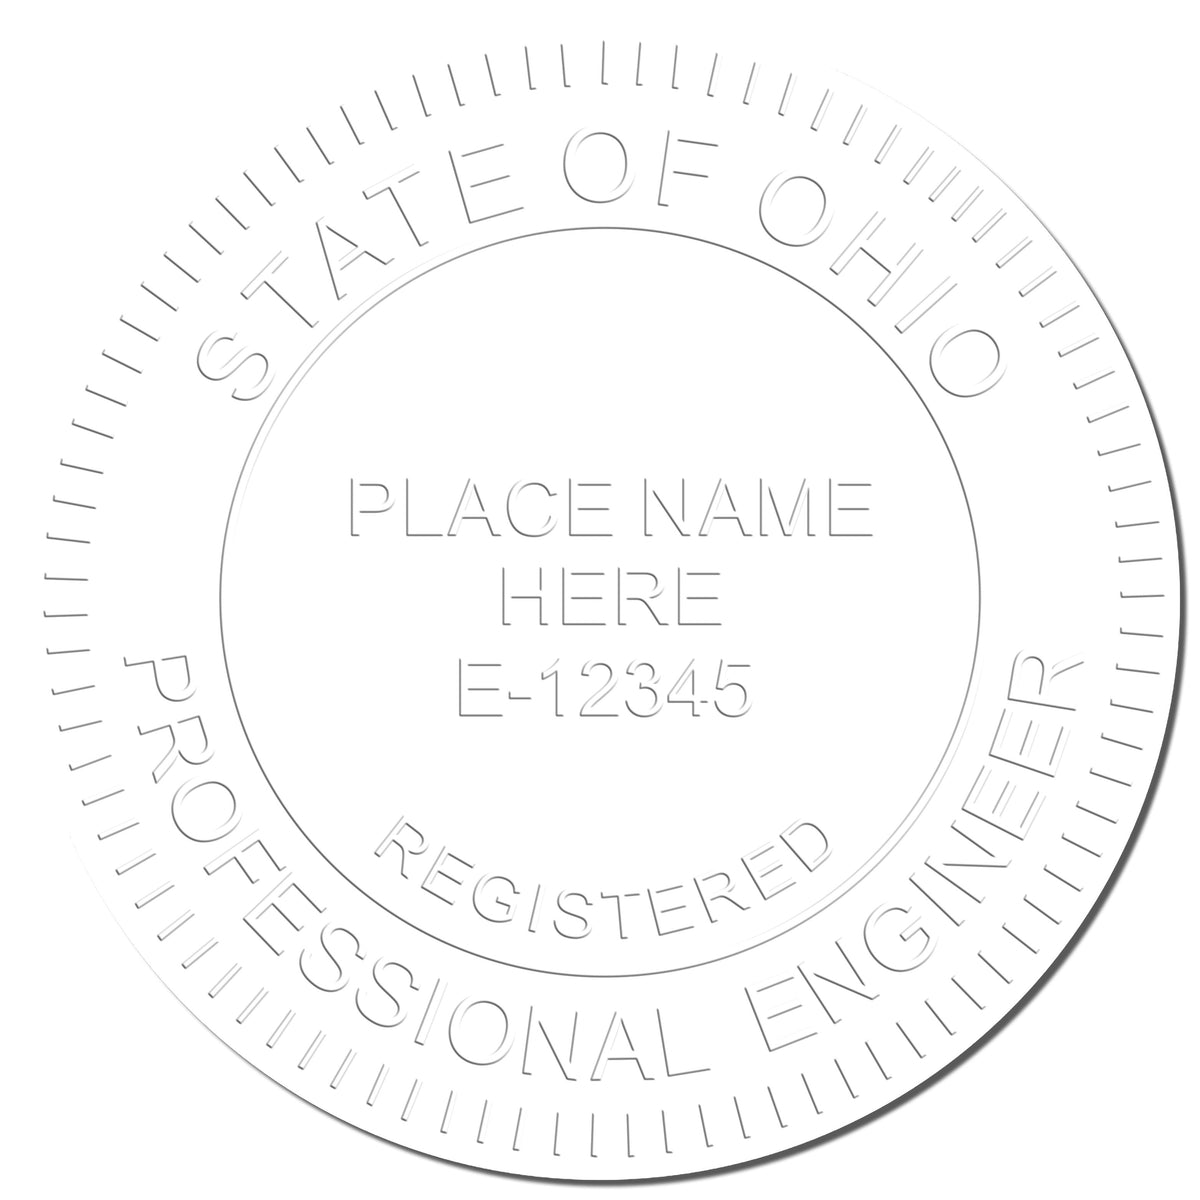 This paper is stamped with a sample imprint of the State of Ohio Extended Long Reach Engineer Seal, signifying its quality and reliability.